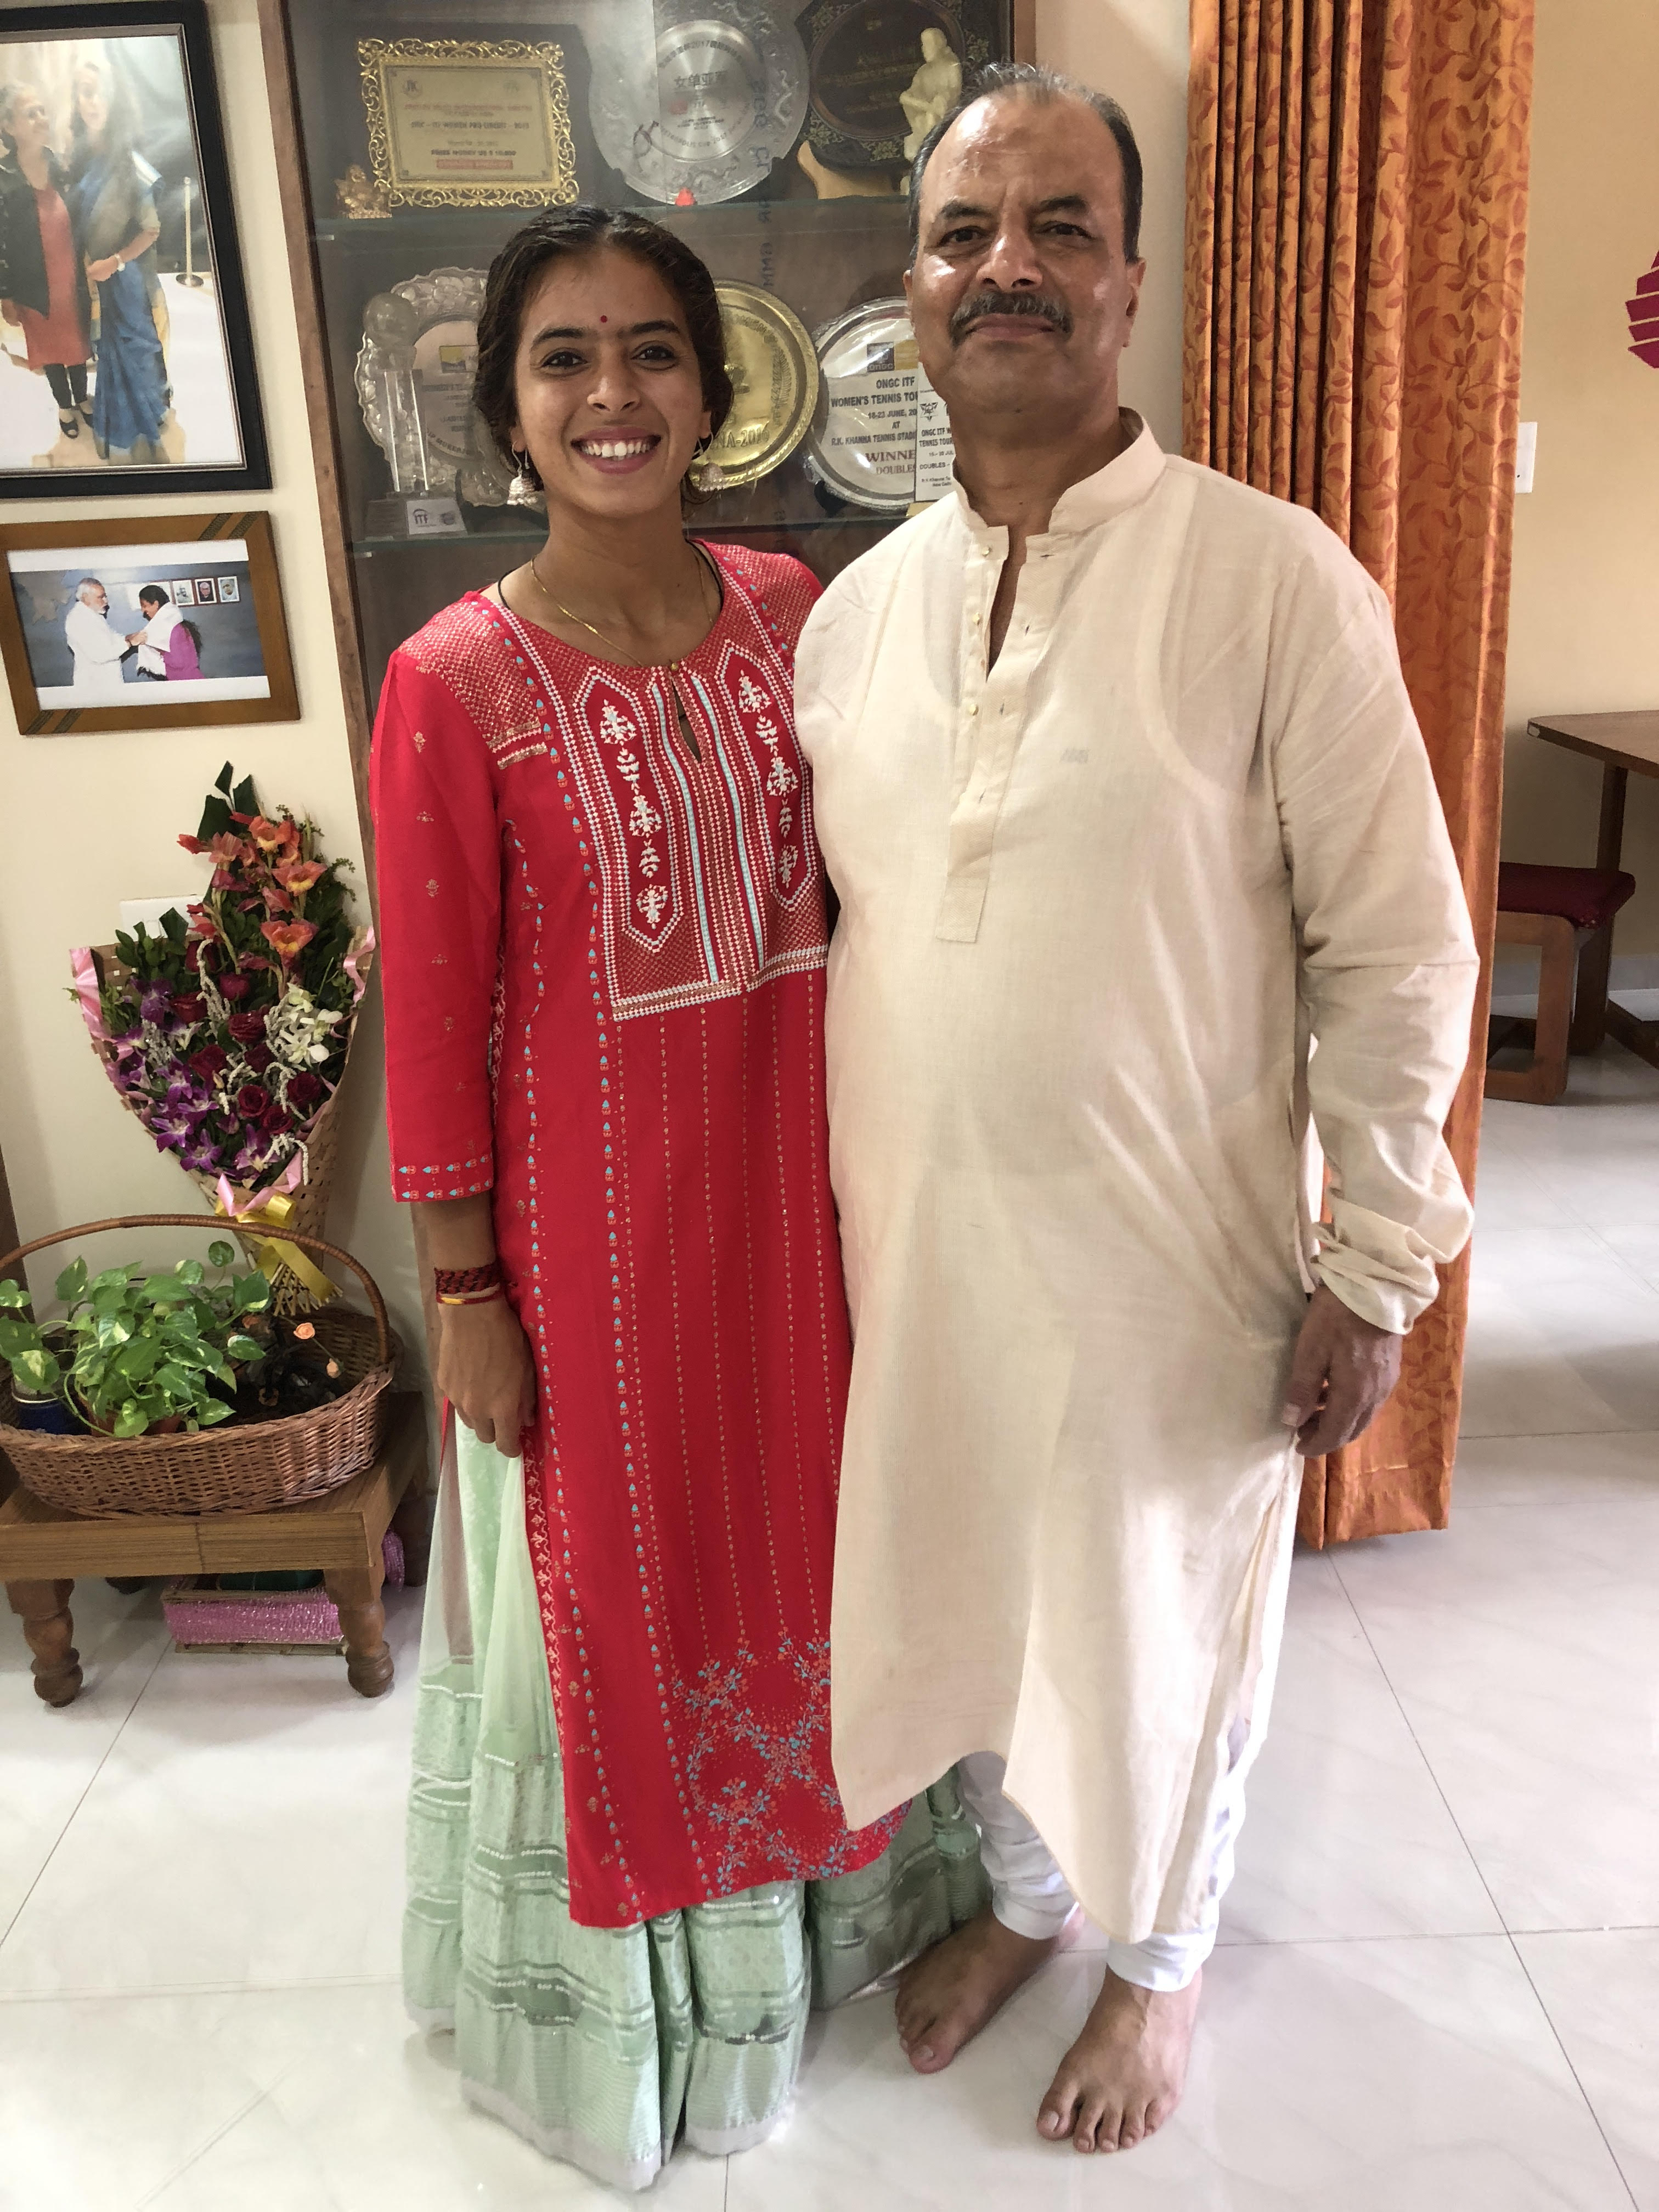 “Face challenges. Do not get bogged down. Do not look back. March ahead despite all the difficulties.” advises Ravinder Krishan Raina ji, father of the Indian no. 1 at WTA Rankings, Ankita Raina.